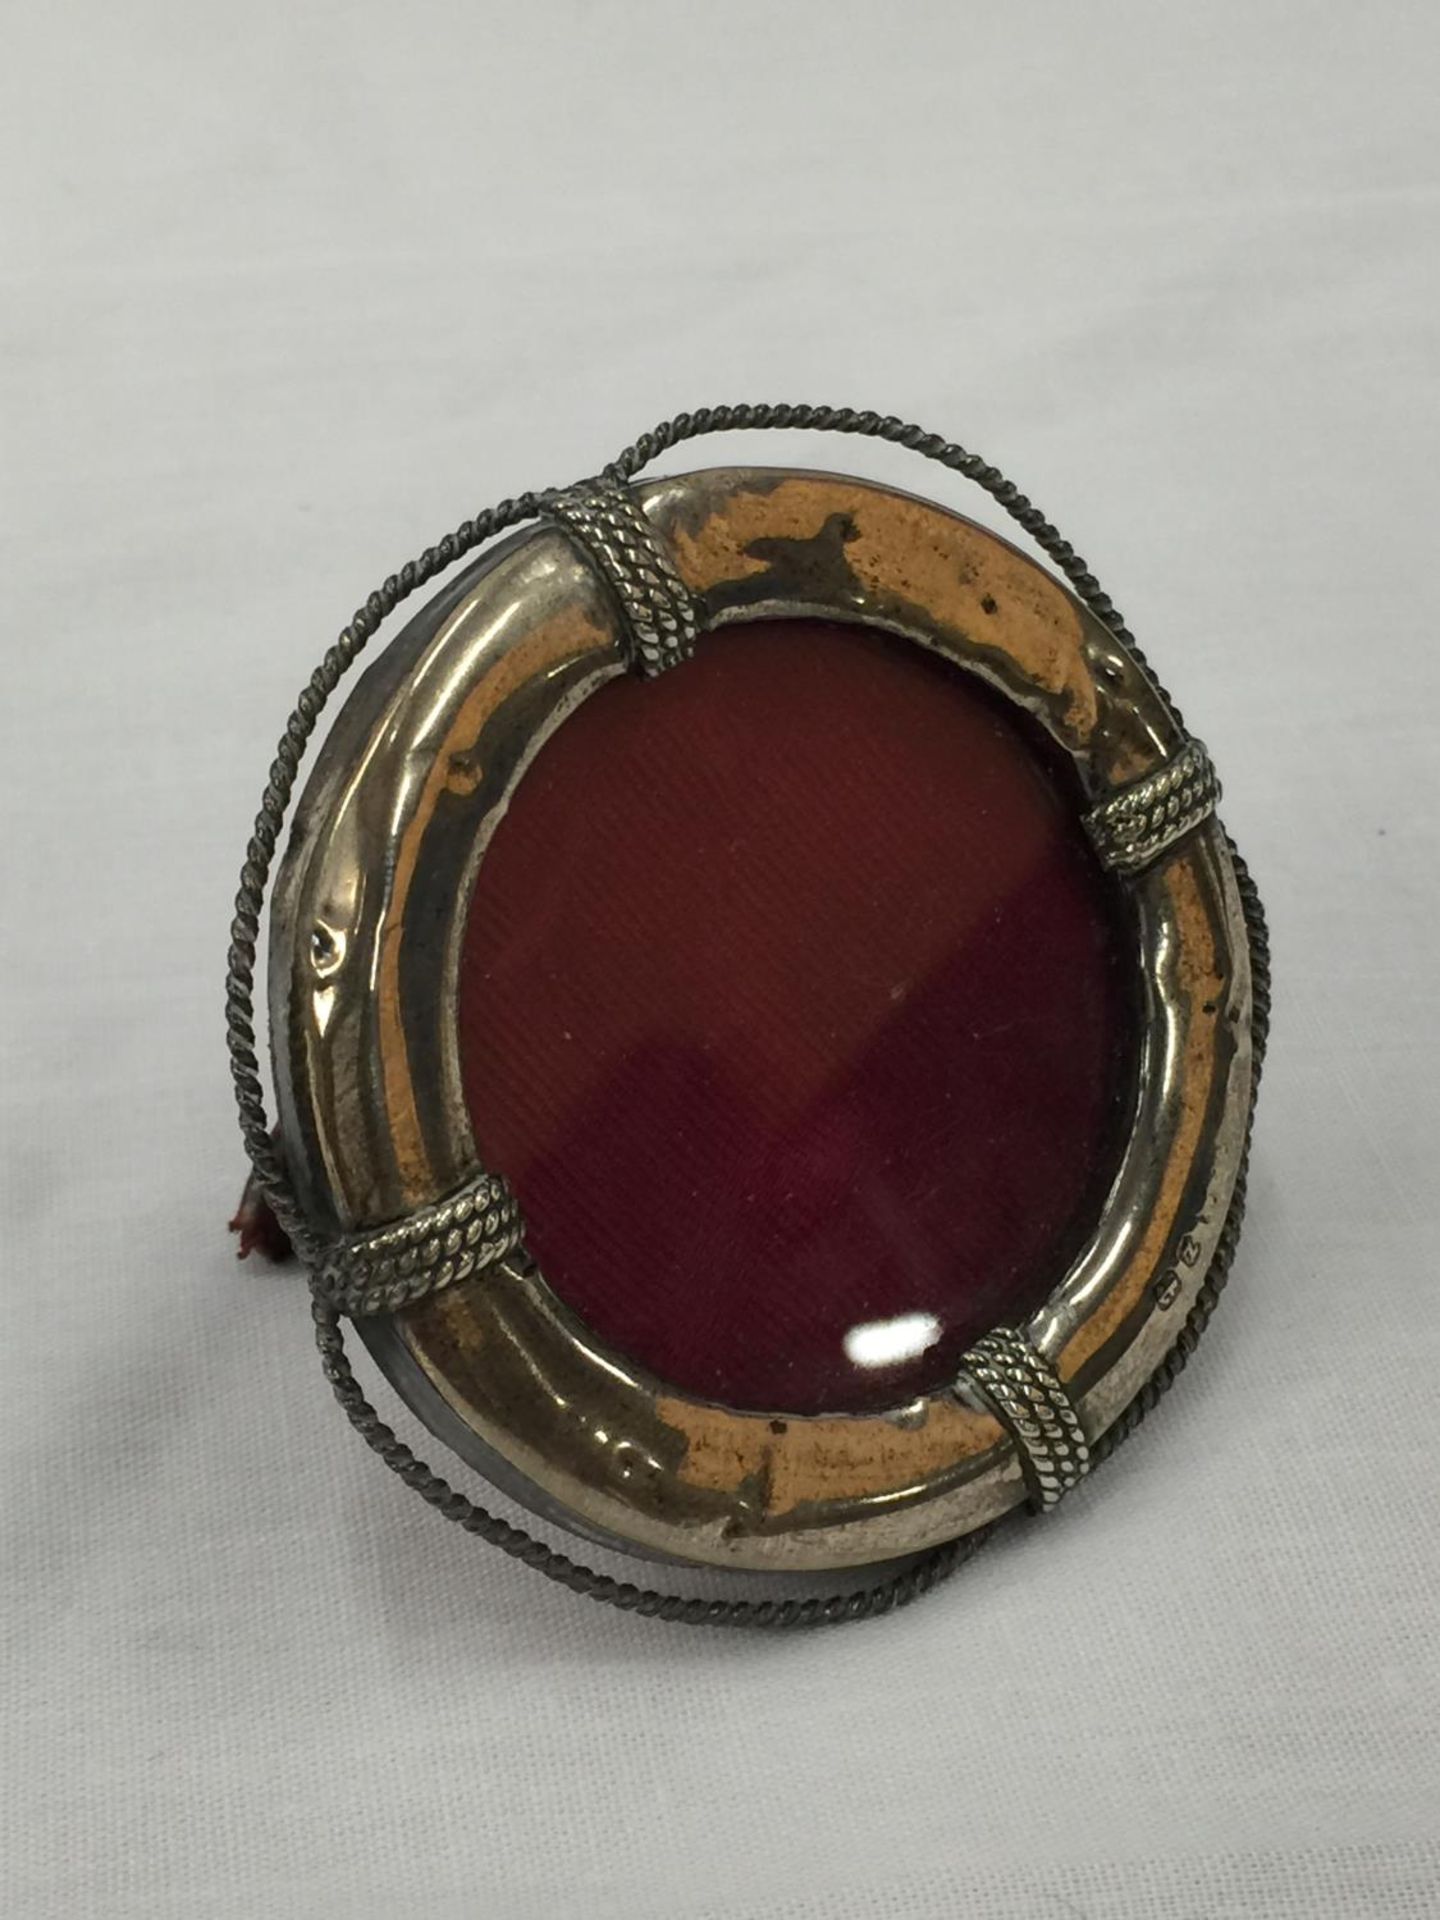 A SMALL BIRMINGHAM HALLMARKED SILVER PICTURE FRAME IN THE STYLE OF A LIFEBUOY H: 7CM - Image 2 of 6